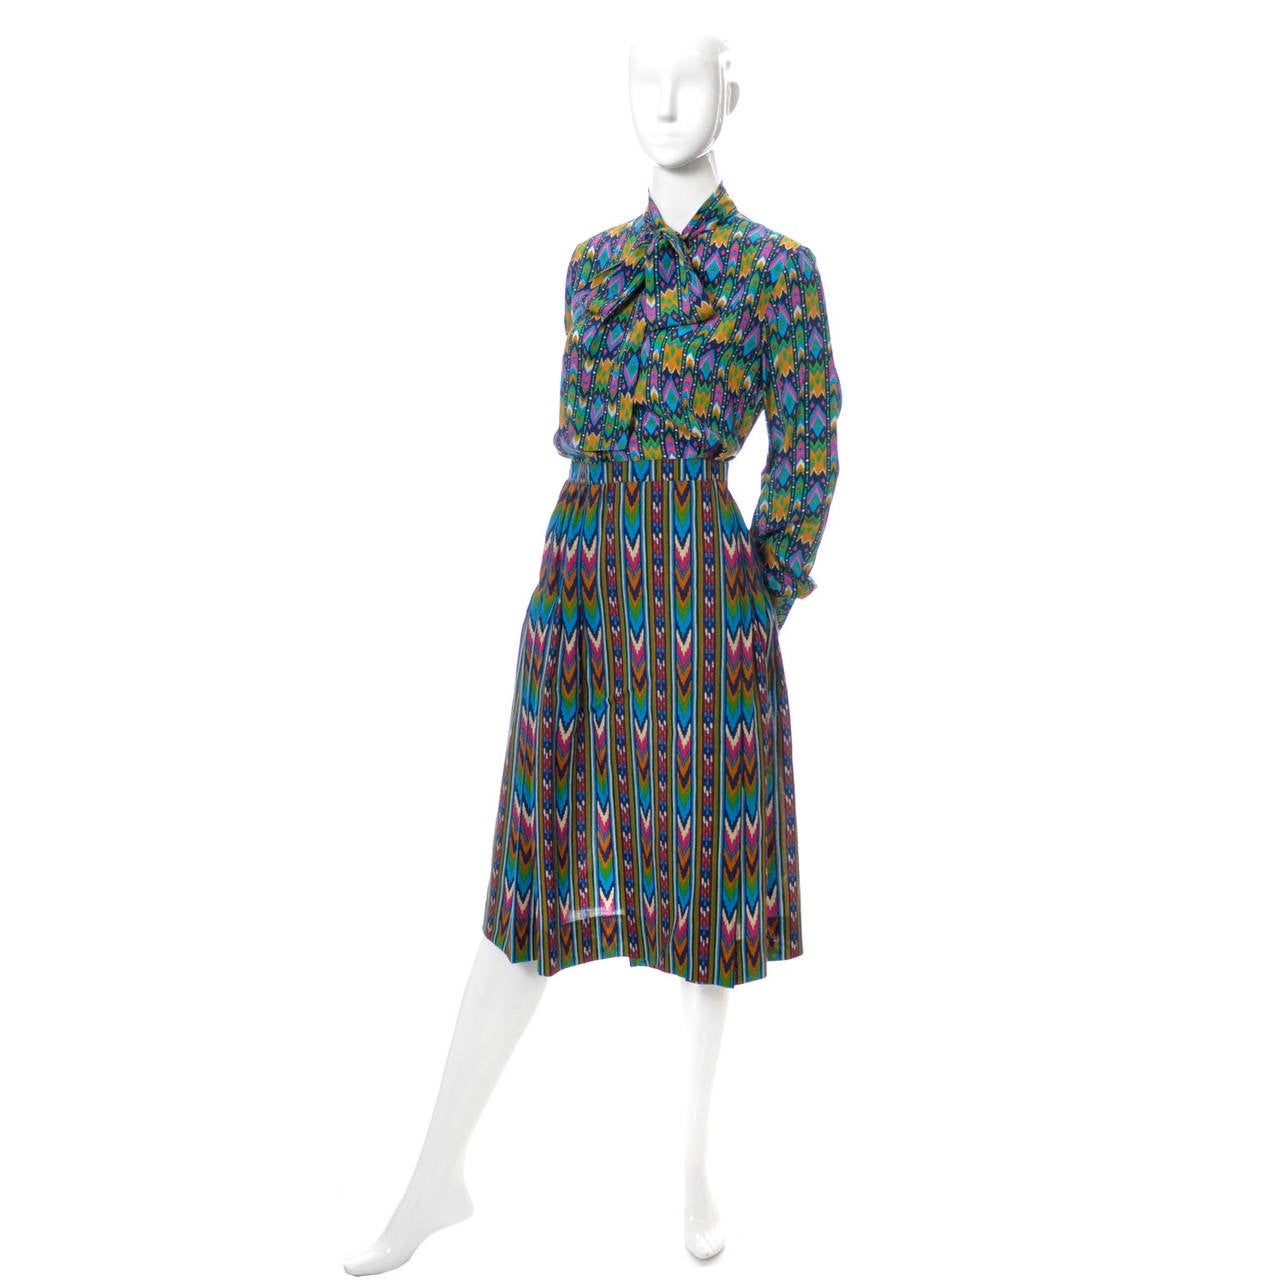 Beautiful vintage 1970's 2 piece dress from Yves Saint Laurent Rive Gauche Paris! The lovely silk blouse has a sash and the wrap pleated skirt is in a coordinating fabric. The blouse sash can be tied with a bow as shown or tied loosely at the neck